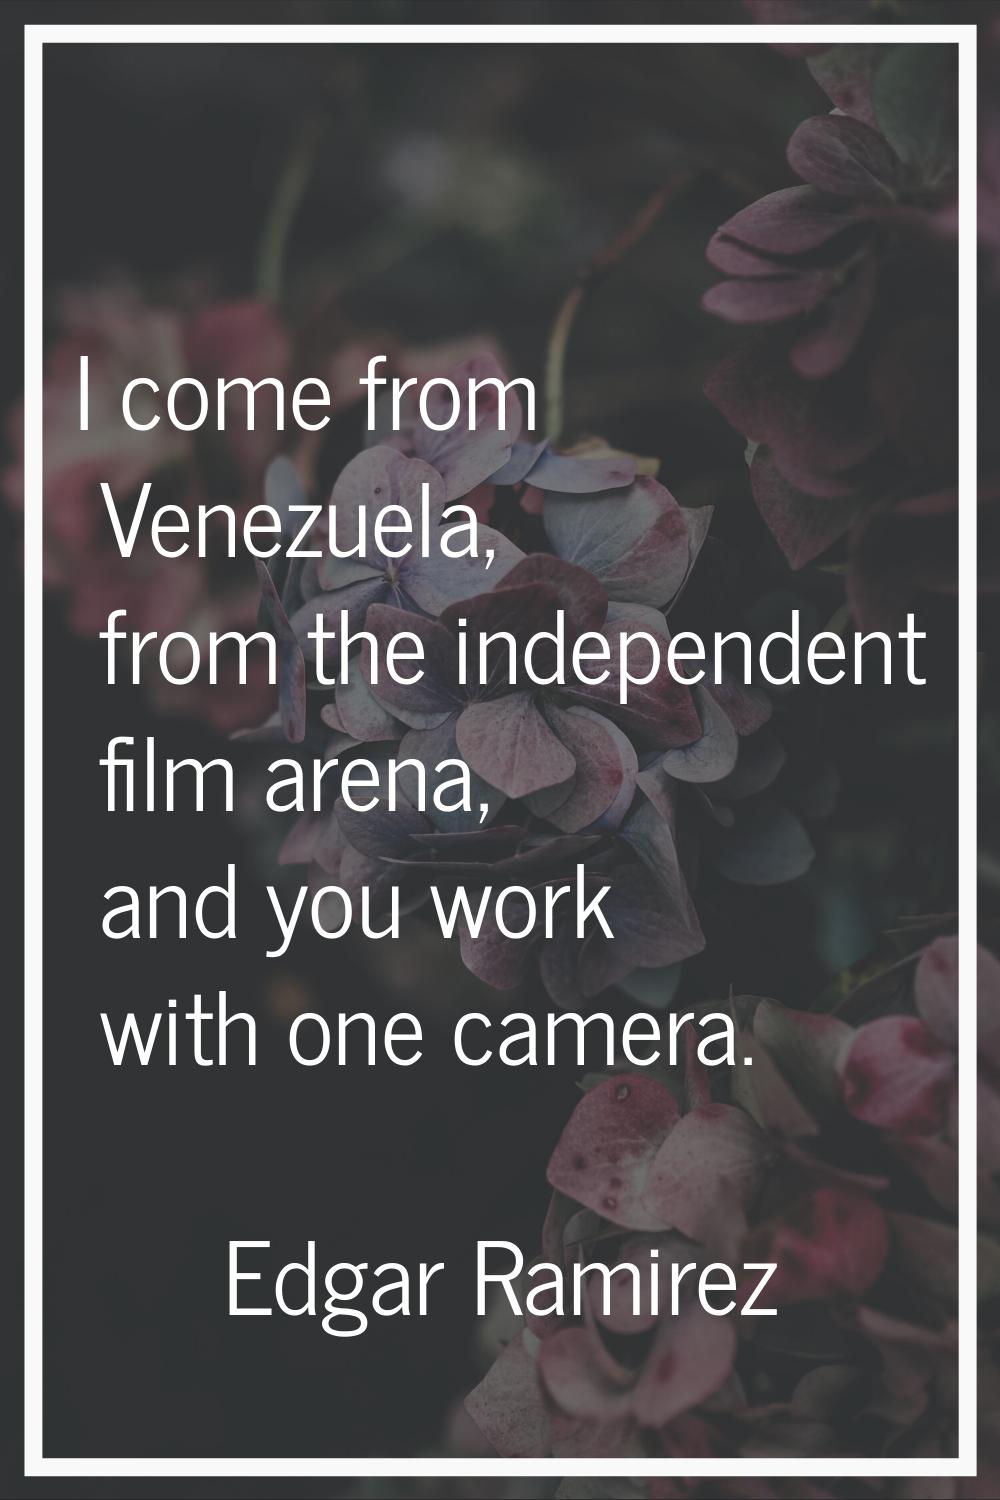 I come from Venezuela, from the independent film arena, and you work with one camera.